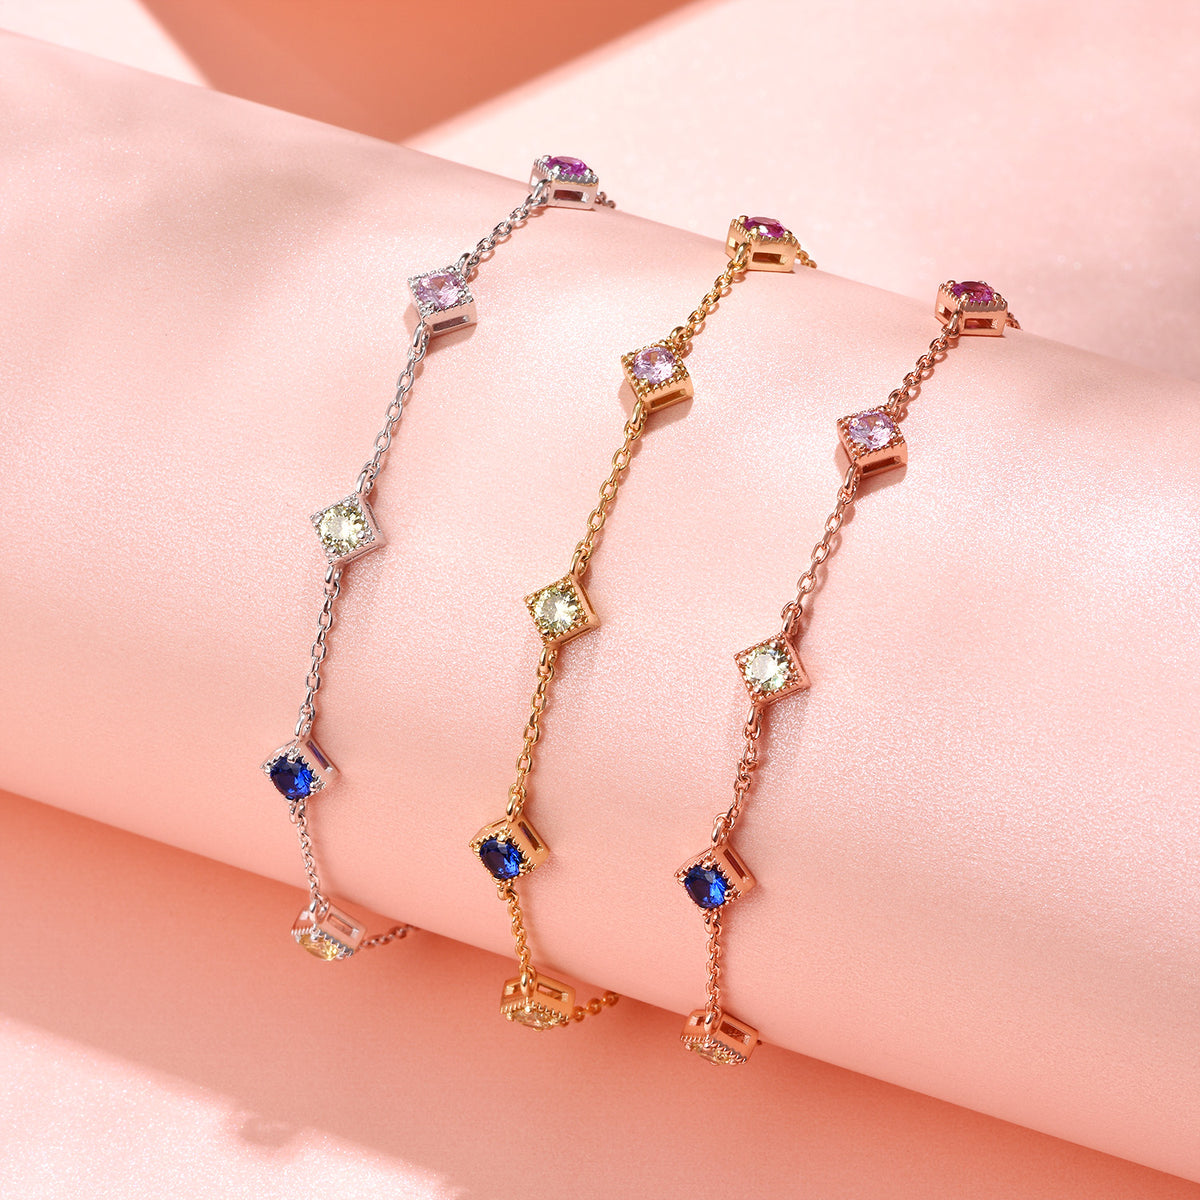 Dissoo® Rainbow Multicolor Square Charm Bracelet in 14K Yellow/Rose Gold Vermeil,and Sterling Silver